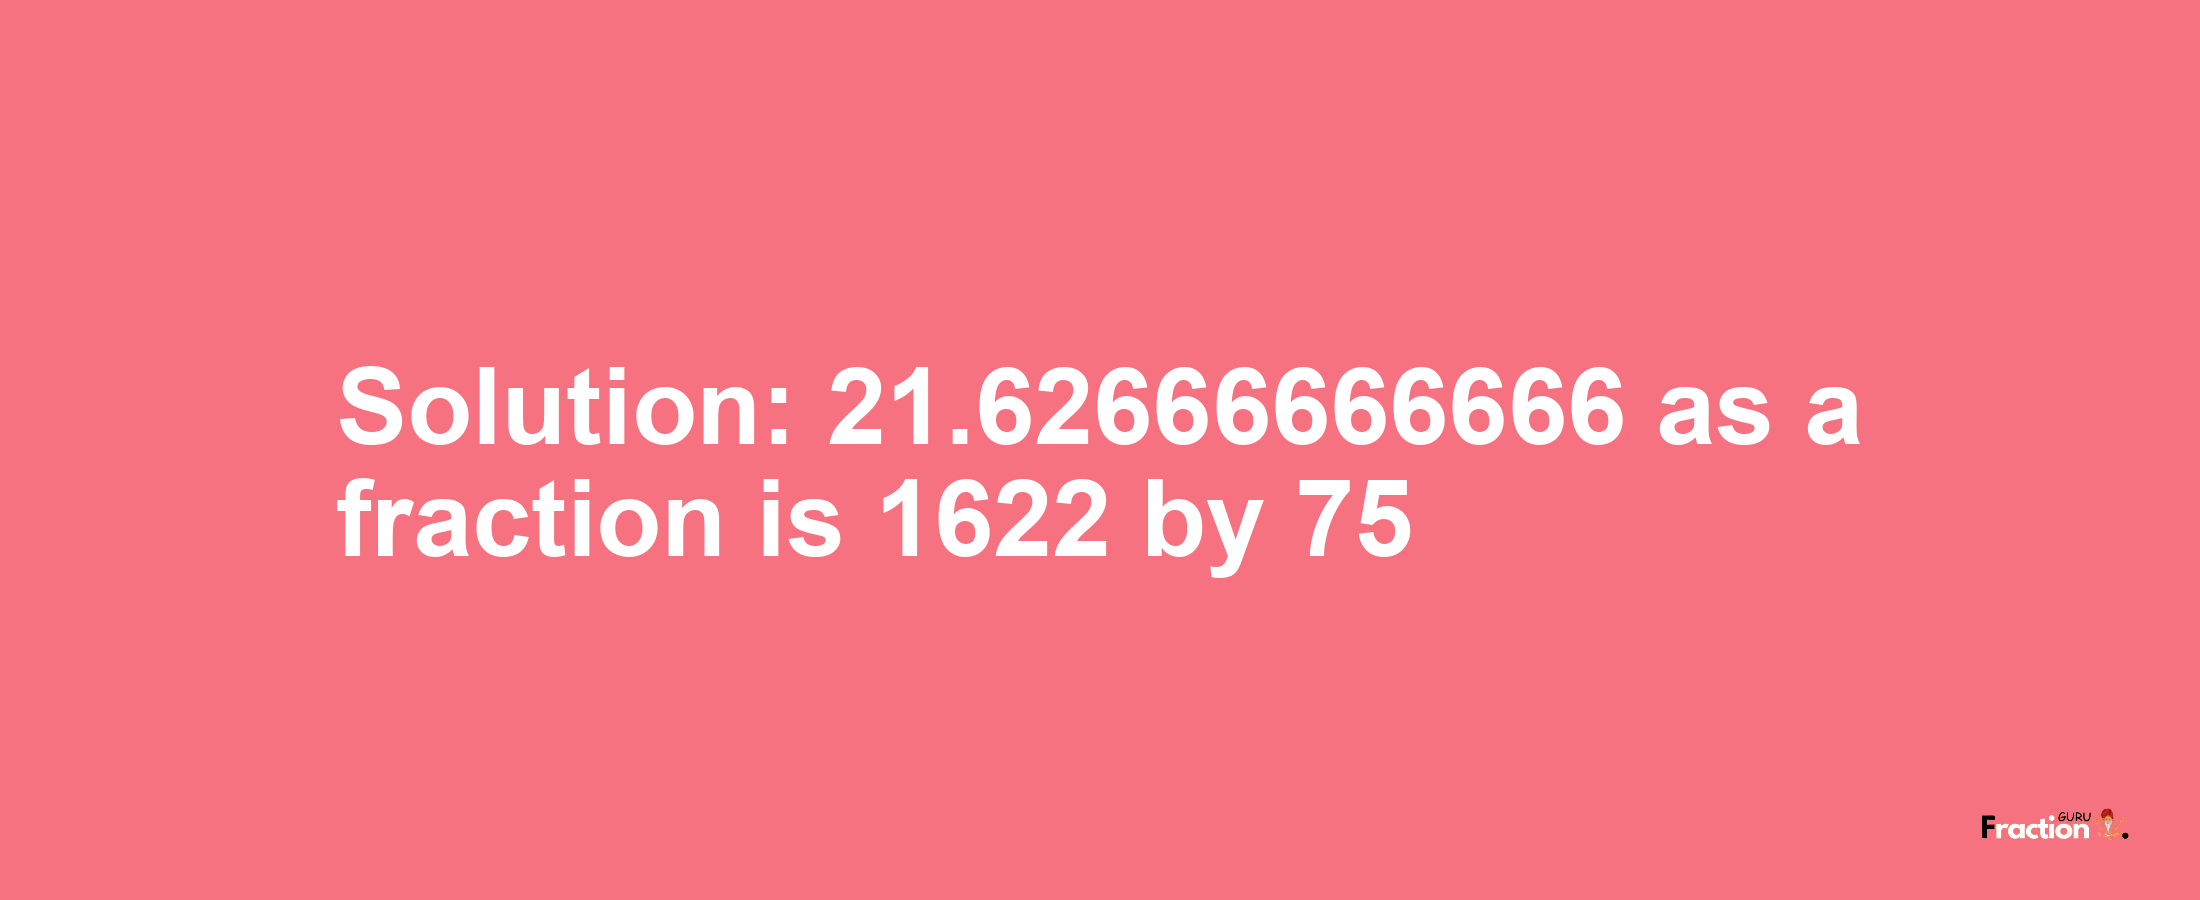 Solution:21.62666666666 as a fraction is 1622/75